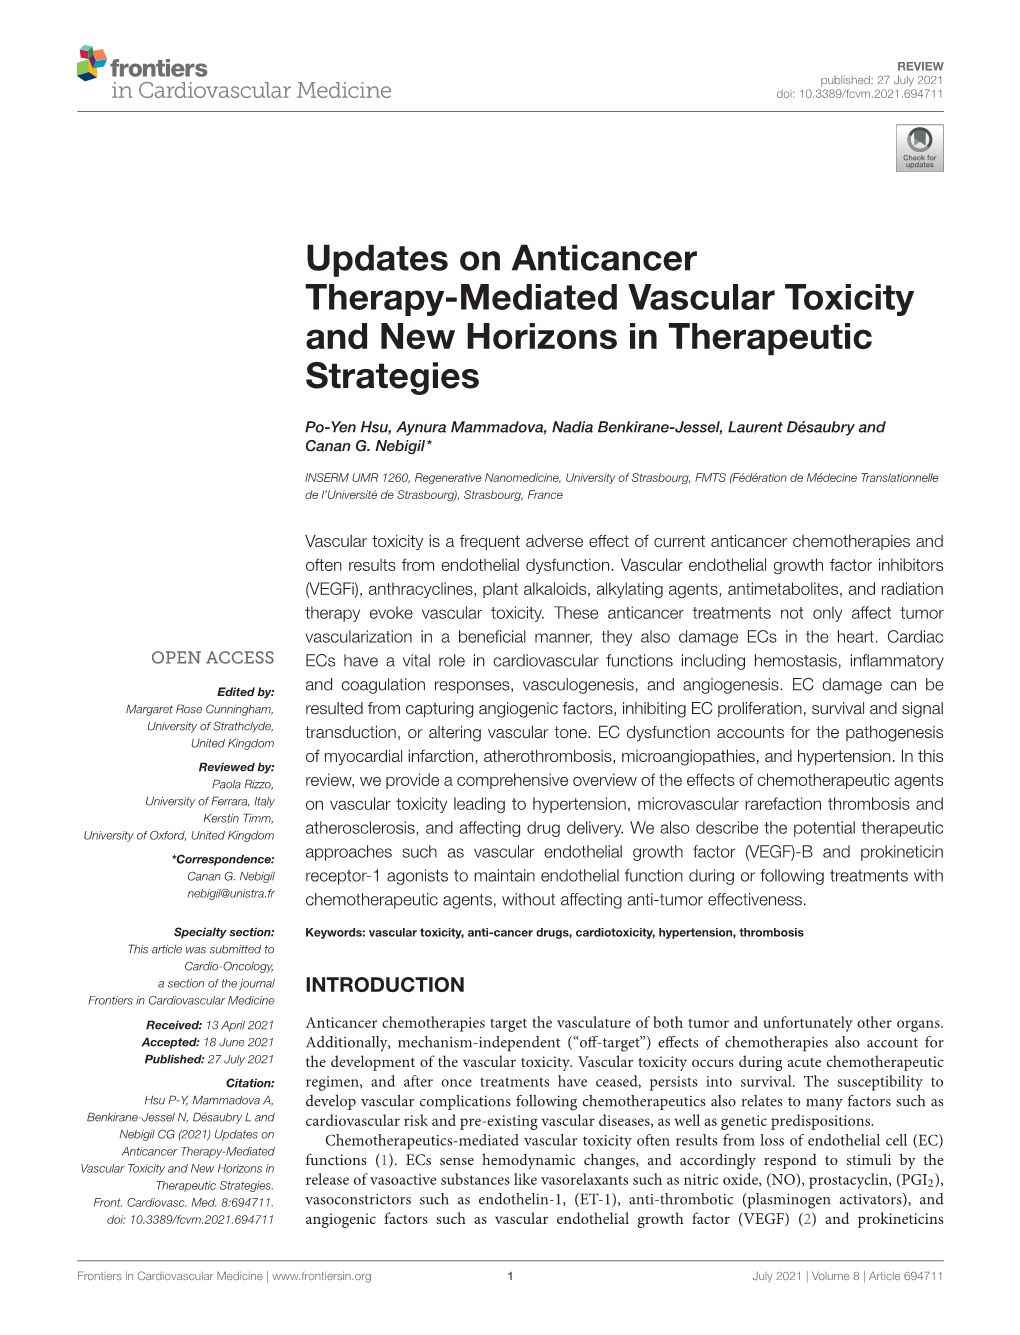 Updates on Anticancer Therapy-Mediated Vascular Toxicity and New Horizons in Therapeutic Strategies